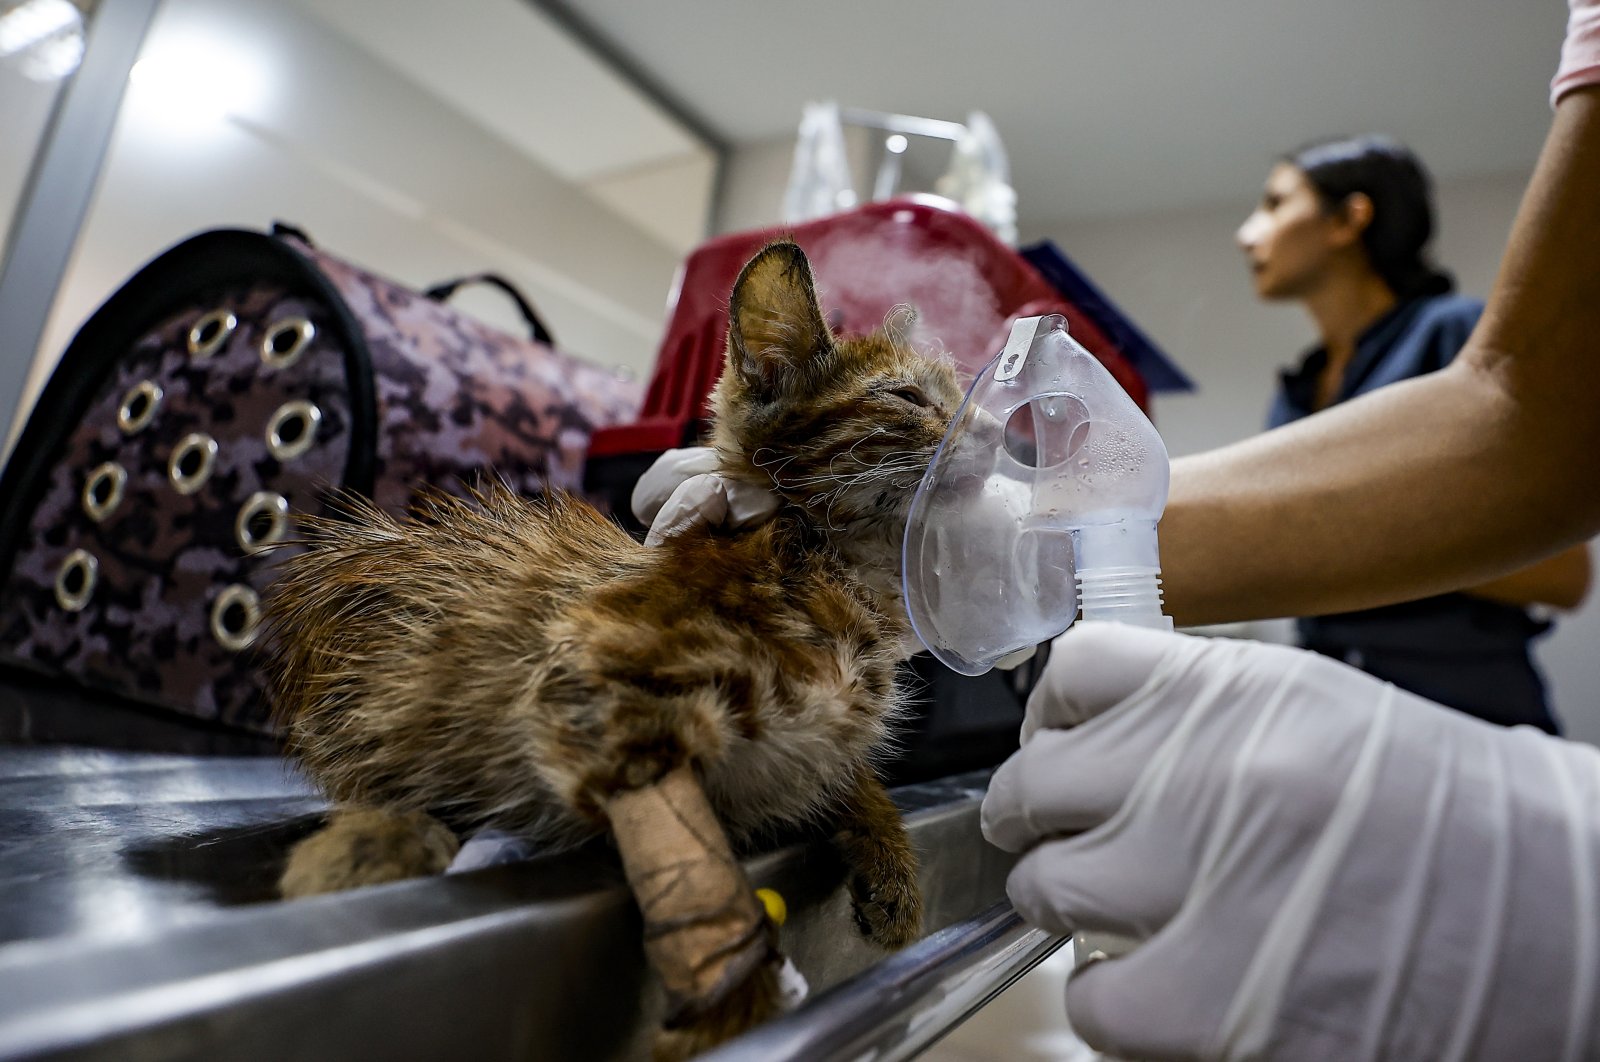 A vet tends to a cat saved from the forest fire, in Manavgat district, Antalya, southern Turkey, July 31, 2021. (AA PHOTO)